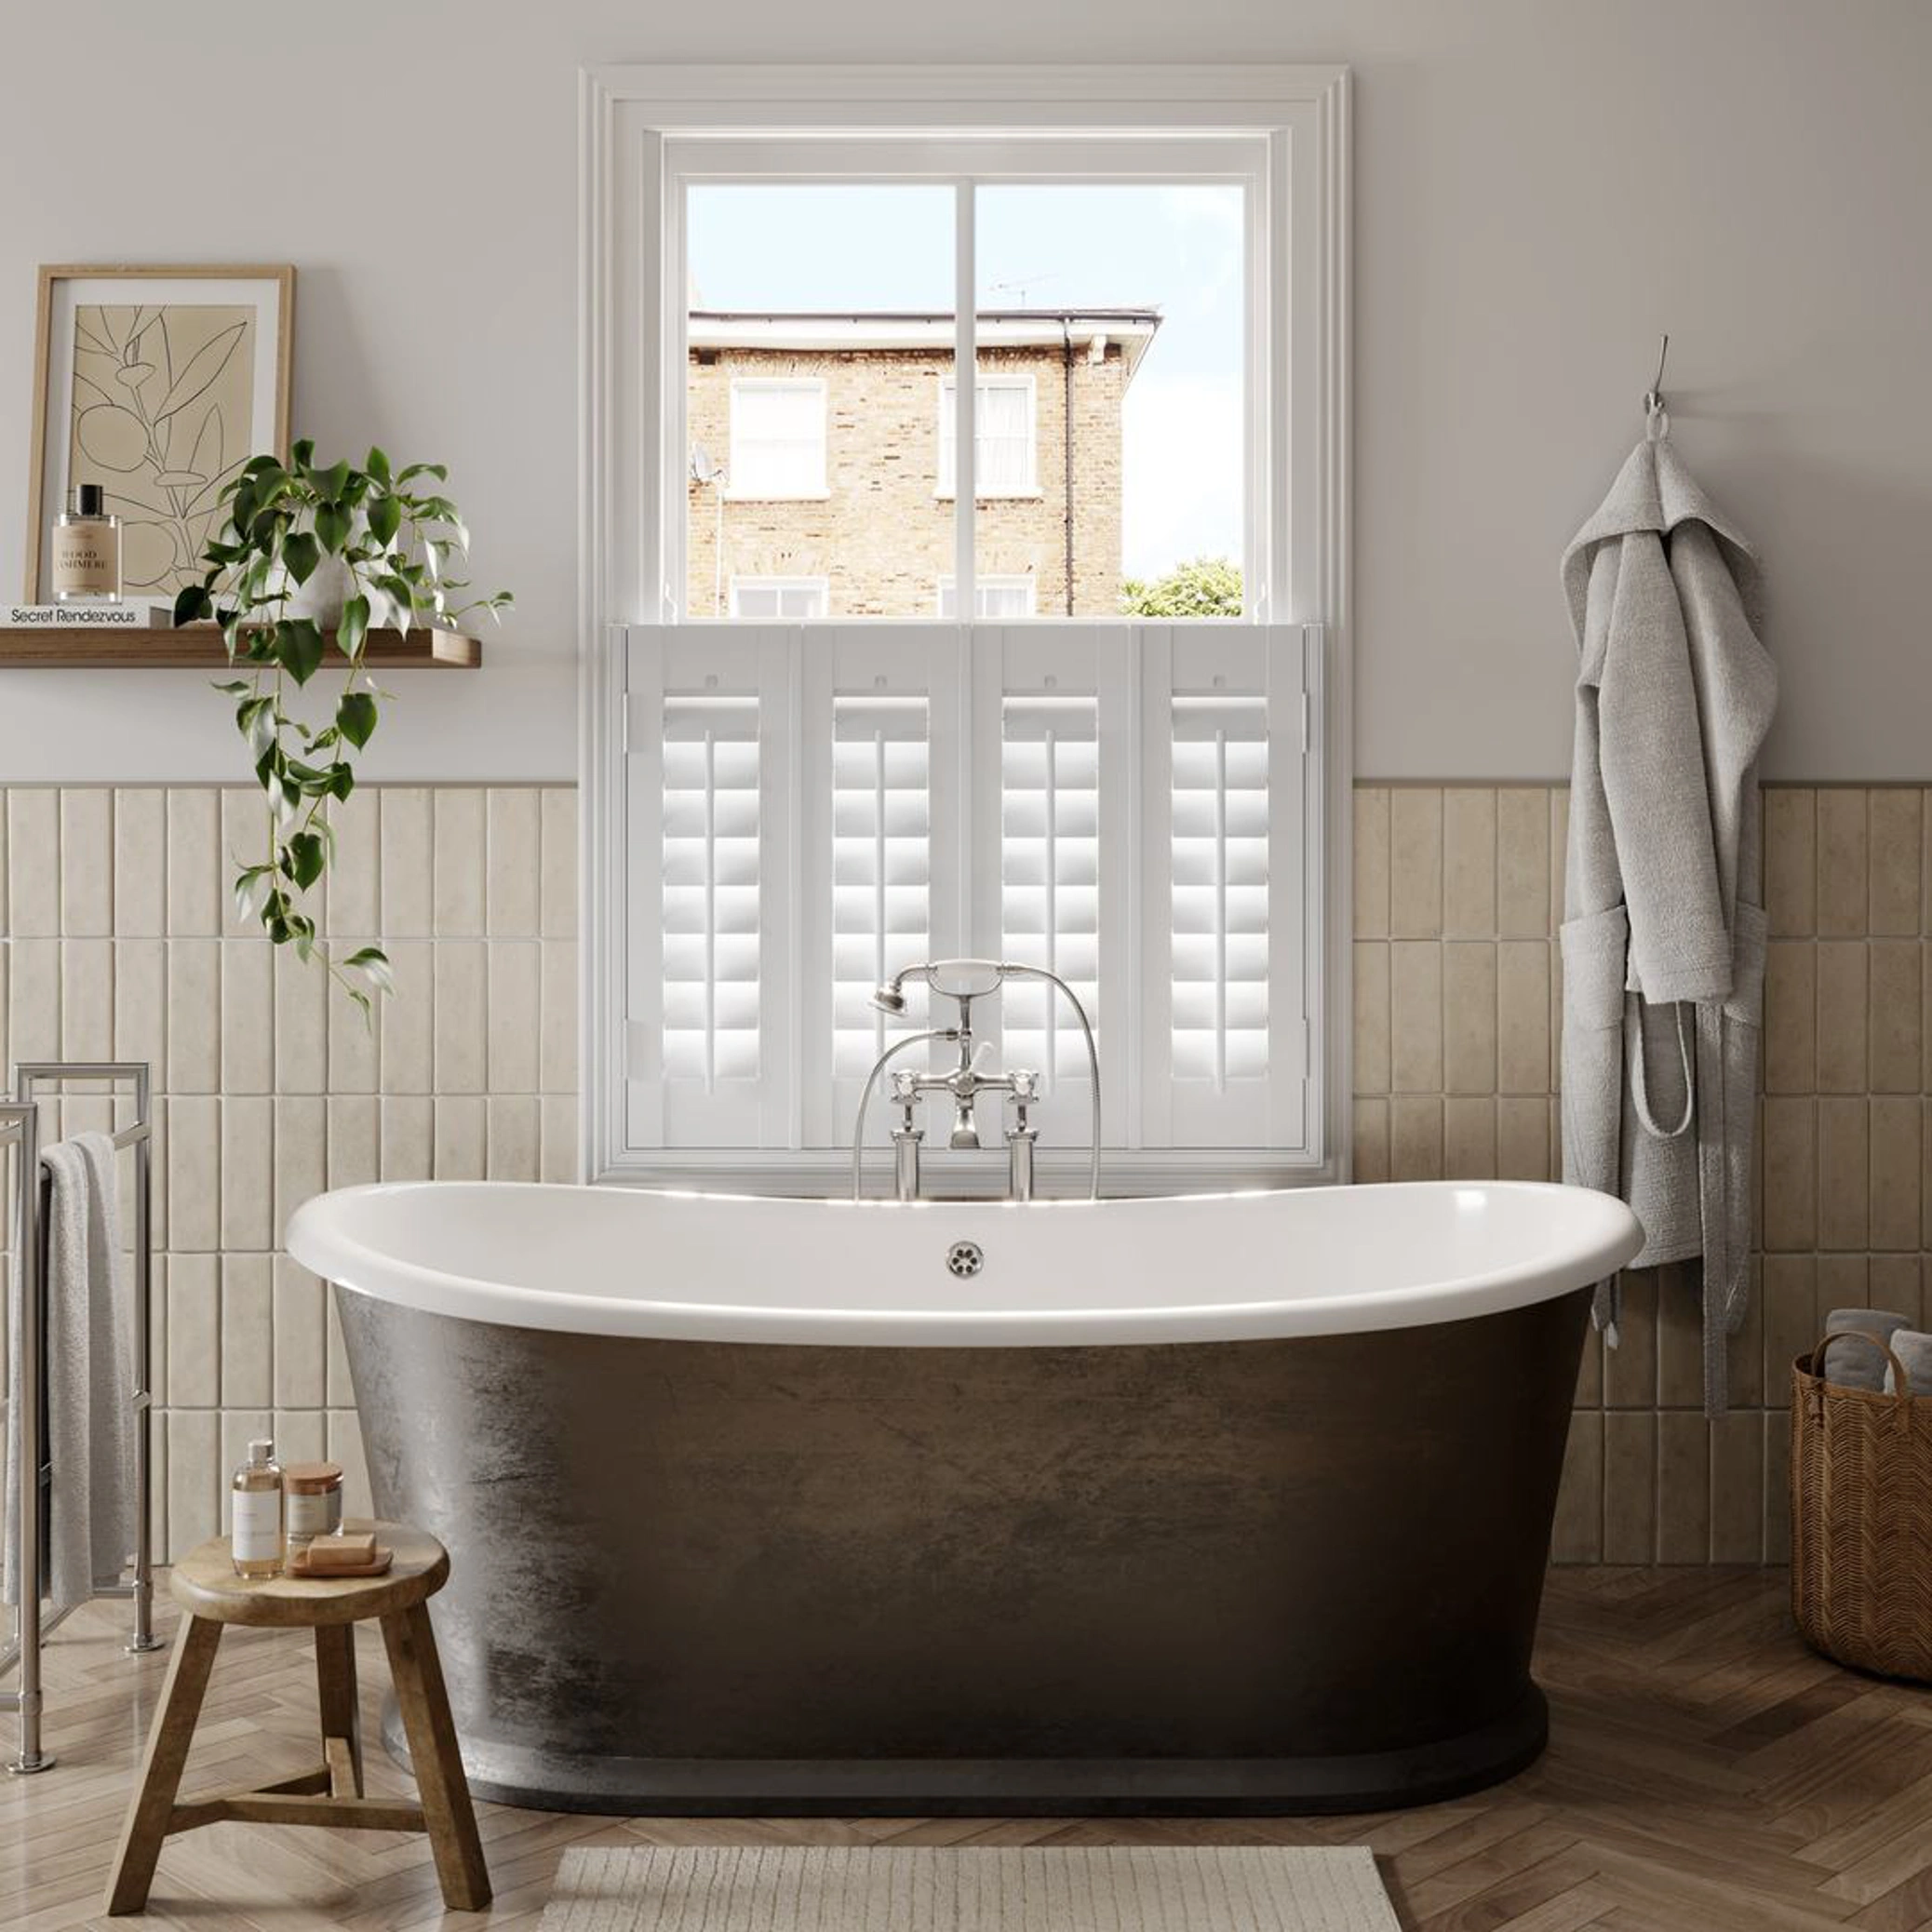 White cafe style shutters by bath